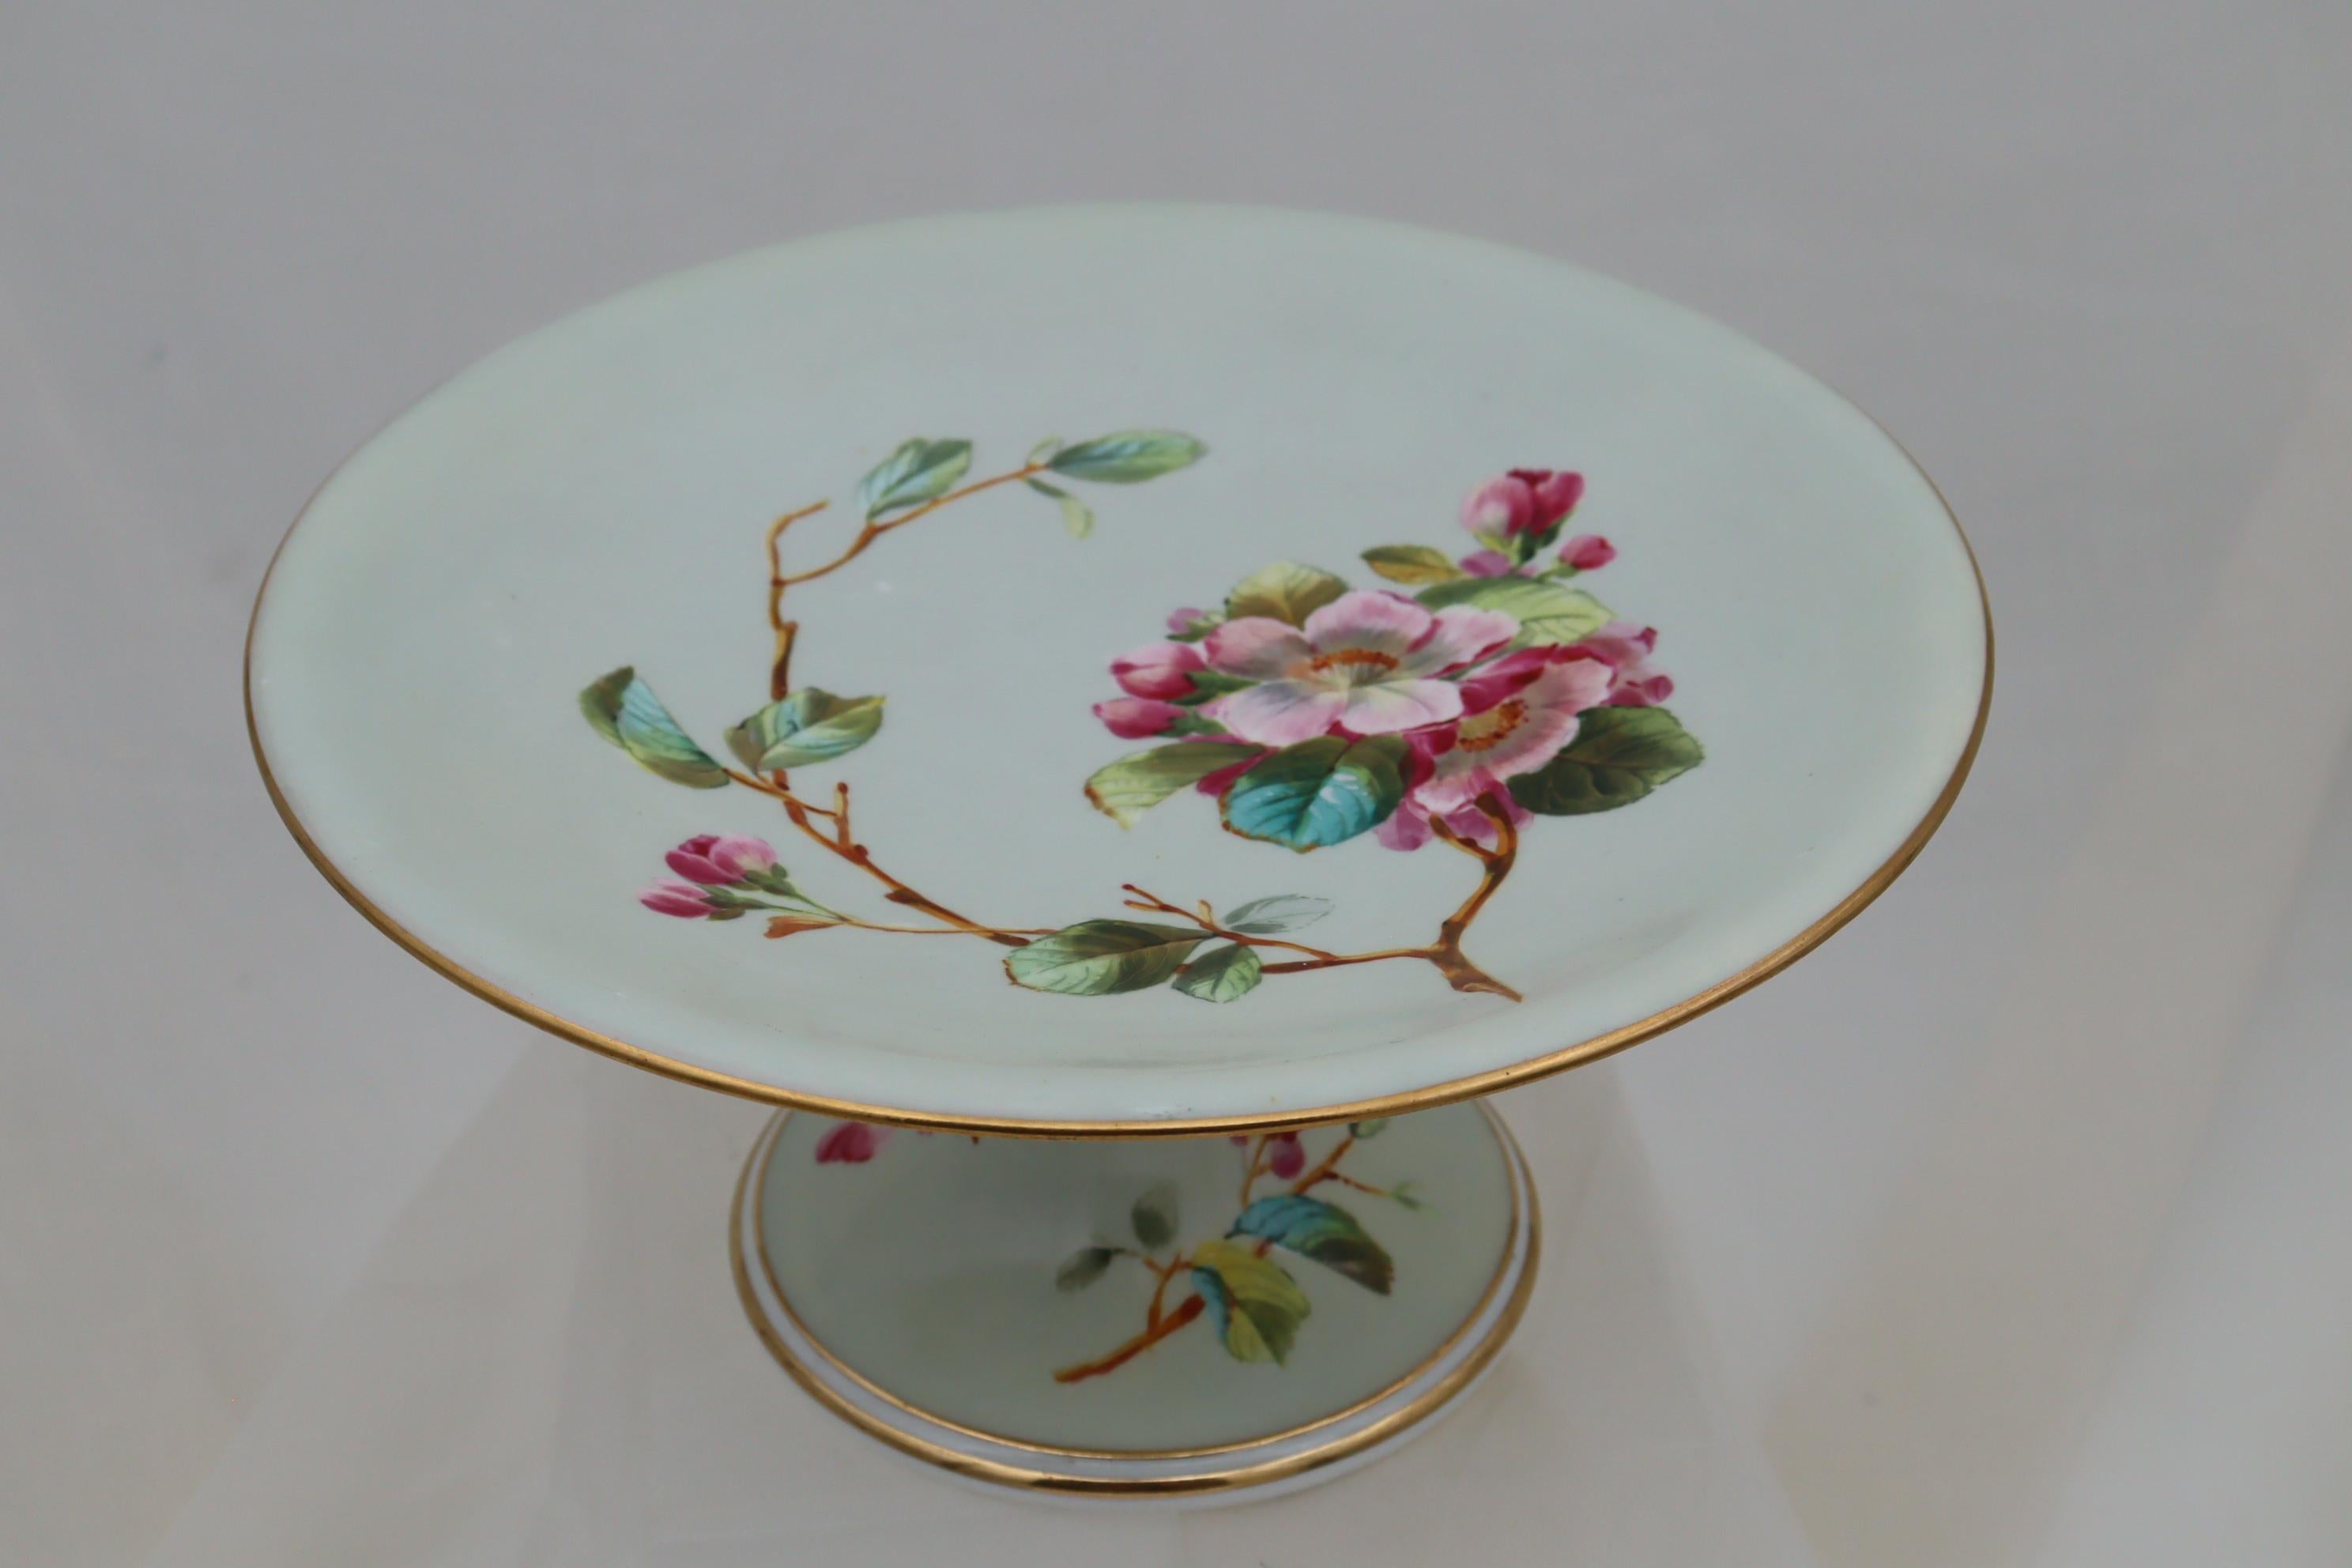 This very good quality eighteen piece hand painted porcelain dessert service by William Brownfield of Cobridge in Staffordshire consists of two high comports, four low comports and twelve plates. Each piece is decorated with a hand painted